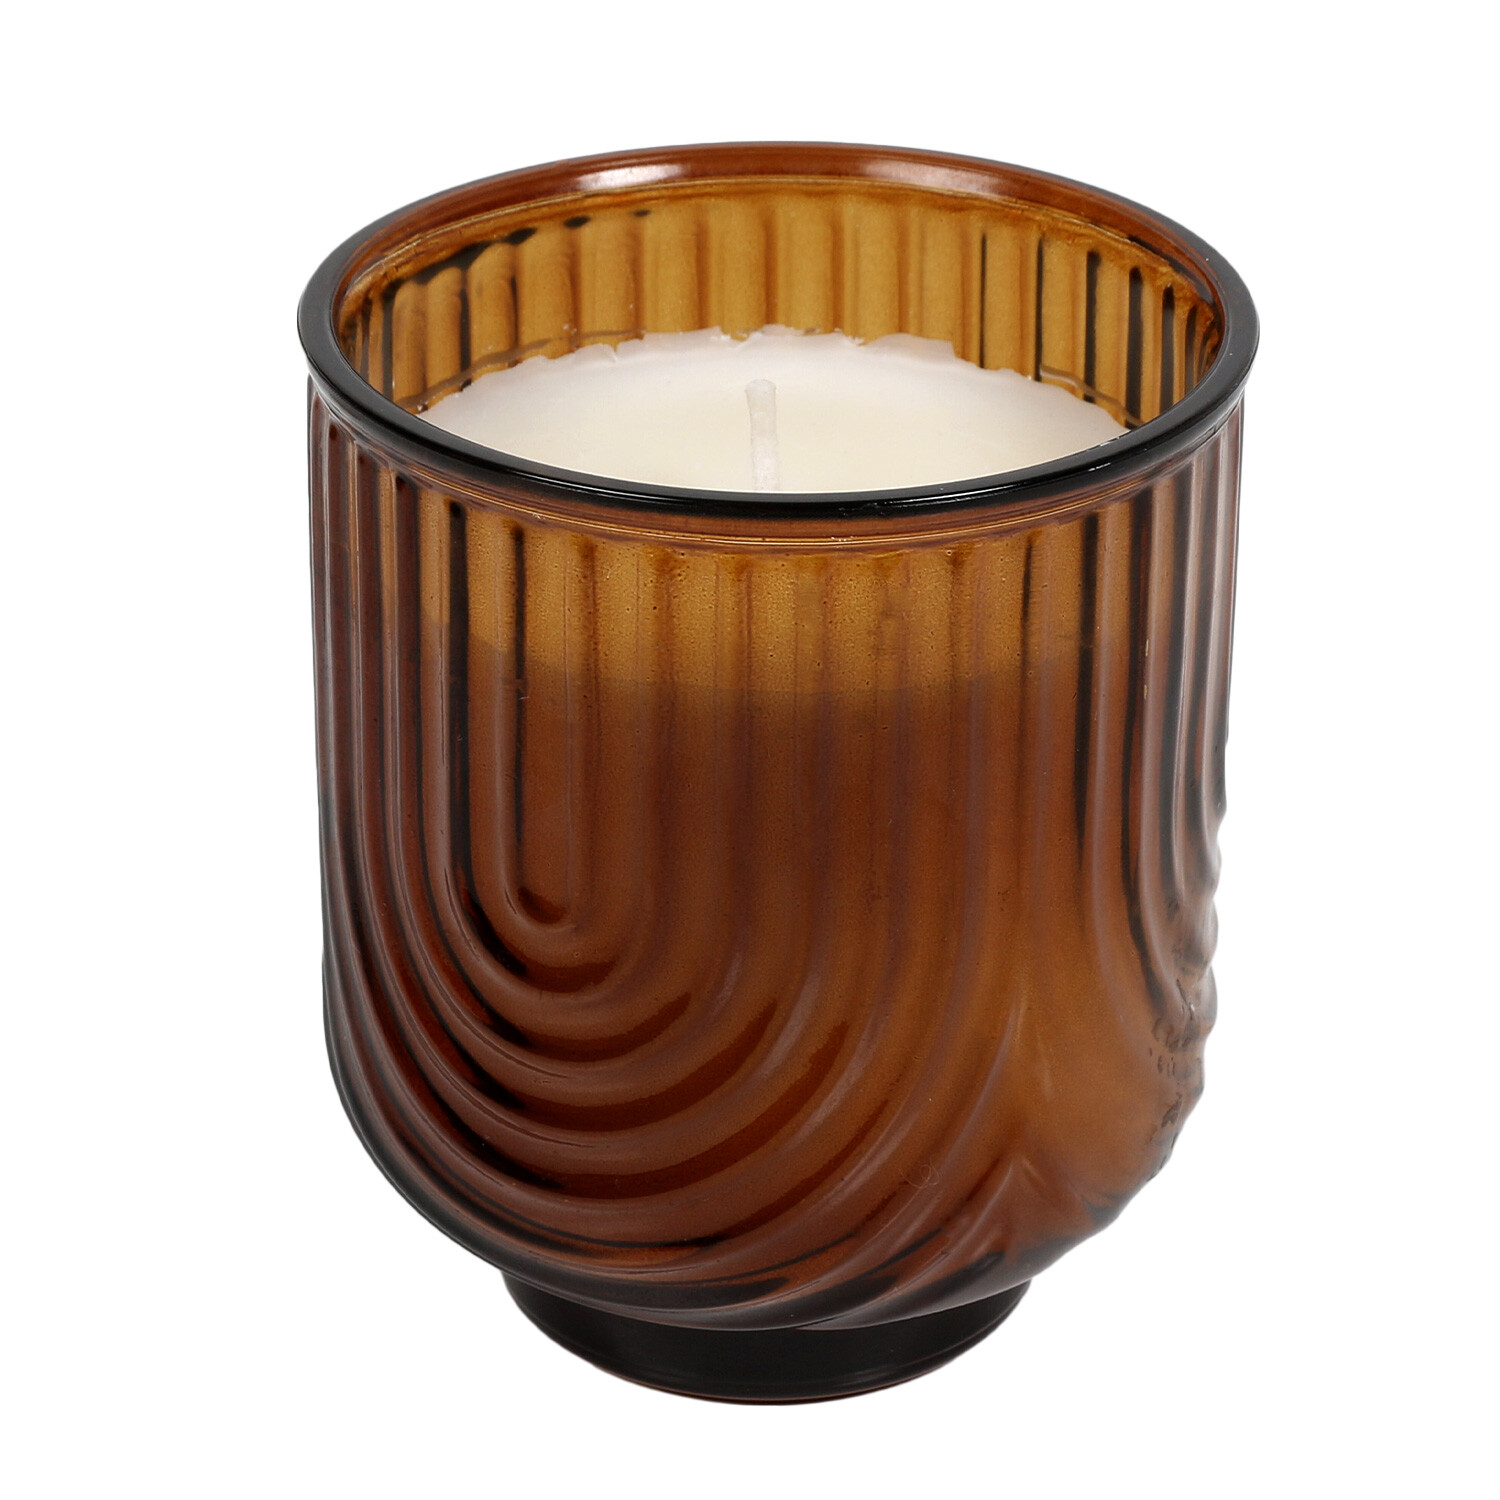 Single Amber and Tobacco Scented Candle in Assorted styles Image 2